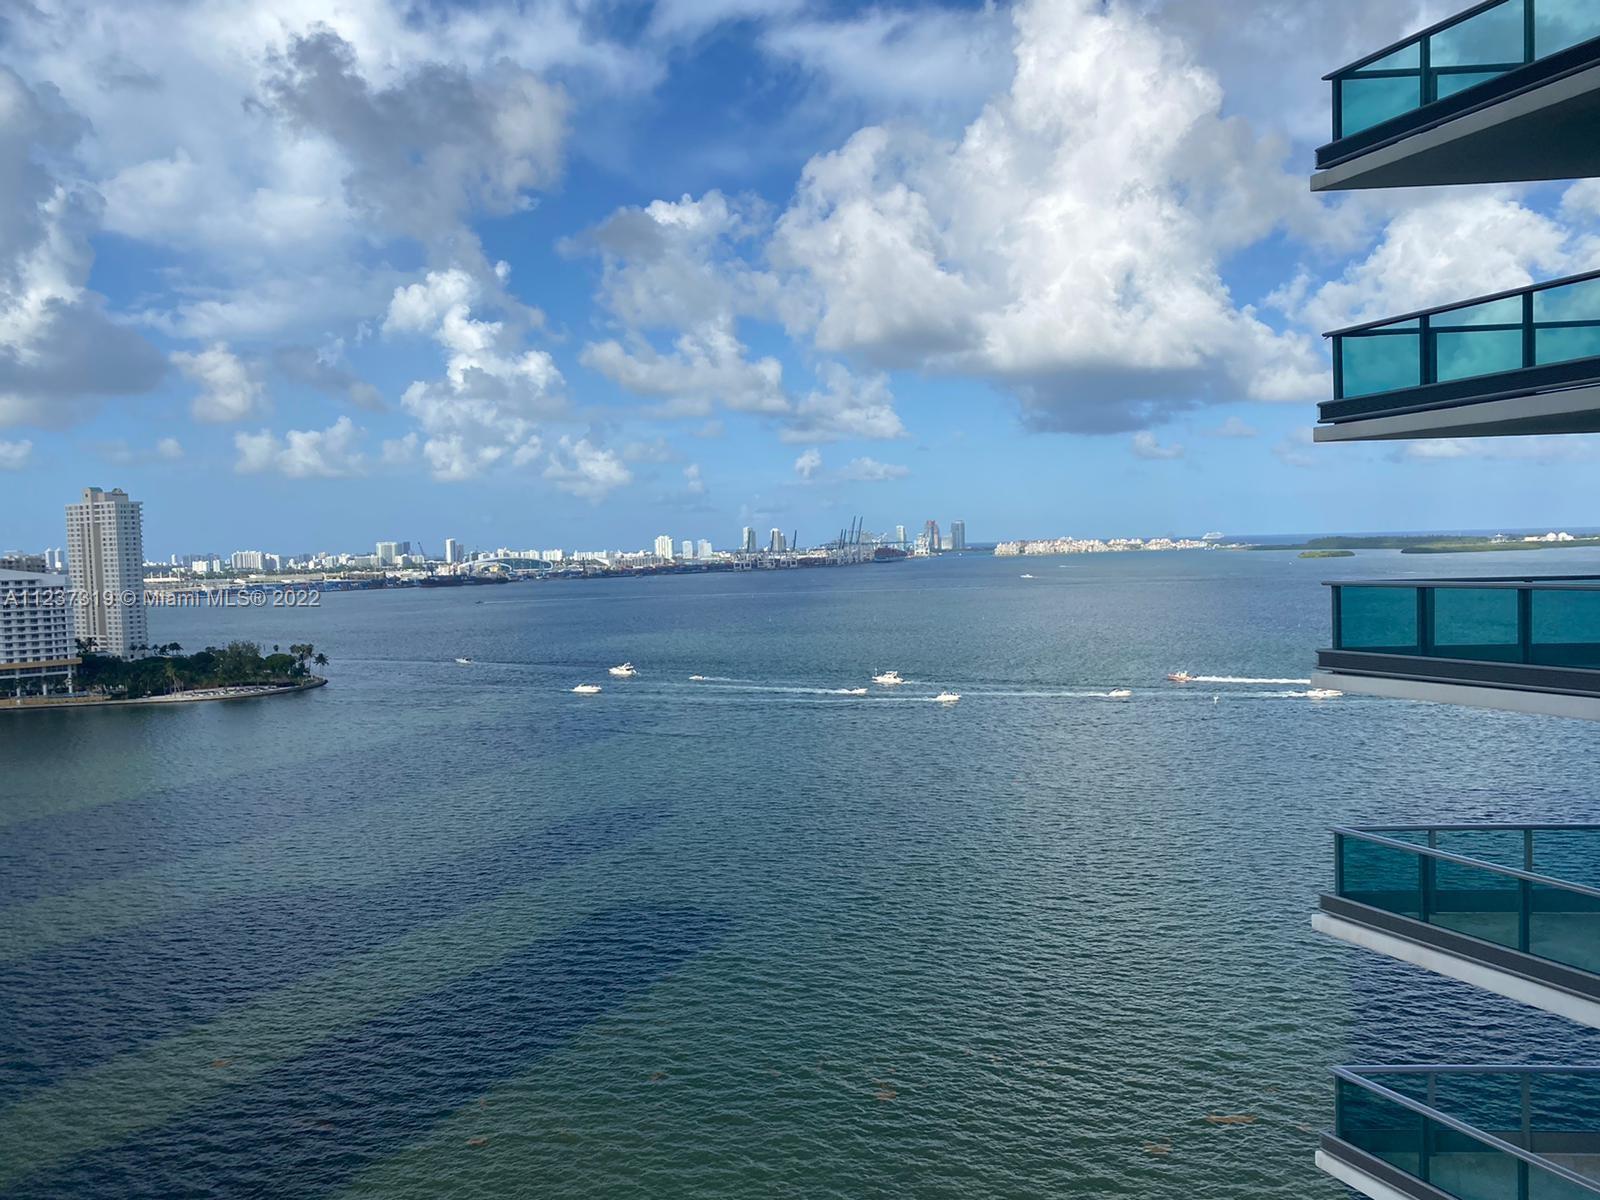 UNIQUE REDUCTION IN PRICE FOR A DECIDED BUYER.
STUNNING 2/2 CORNER UNIT IN BEST RESIDENTIAL BUILDING IN BRICKELL. OPEN BAY VIEWS FROM LIVING ROOM AND BED-ROOM PLUS CITY VIEWS, ALL THE ROOMS OPEN DIRECTLY TO GREAT BALCONIES. PRIVATE ELEVATOR. 5 STAR AMENITIES, TWO HIGH SKY POOLS WITH BAY VIEWS, SPA, GYM, COMMUNITIES ROOMS ETC. 
LIVING AREAS WITH MARBLE FLOORS, BED-ROOMS COZY WOOD, OPEN KITCHEN WITH STAIN STEEL APPLIANCES WITH GRANITE COUNTER TOPS AND WOOD CABINETRY
REPLACED NEW A/C 2 YEARS AGO